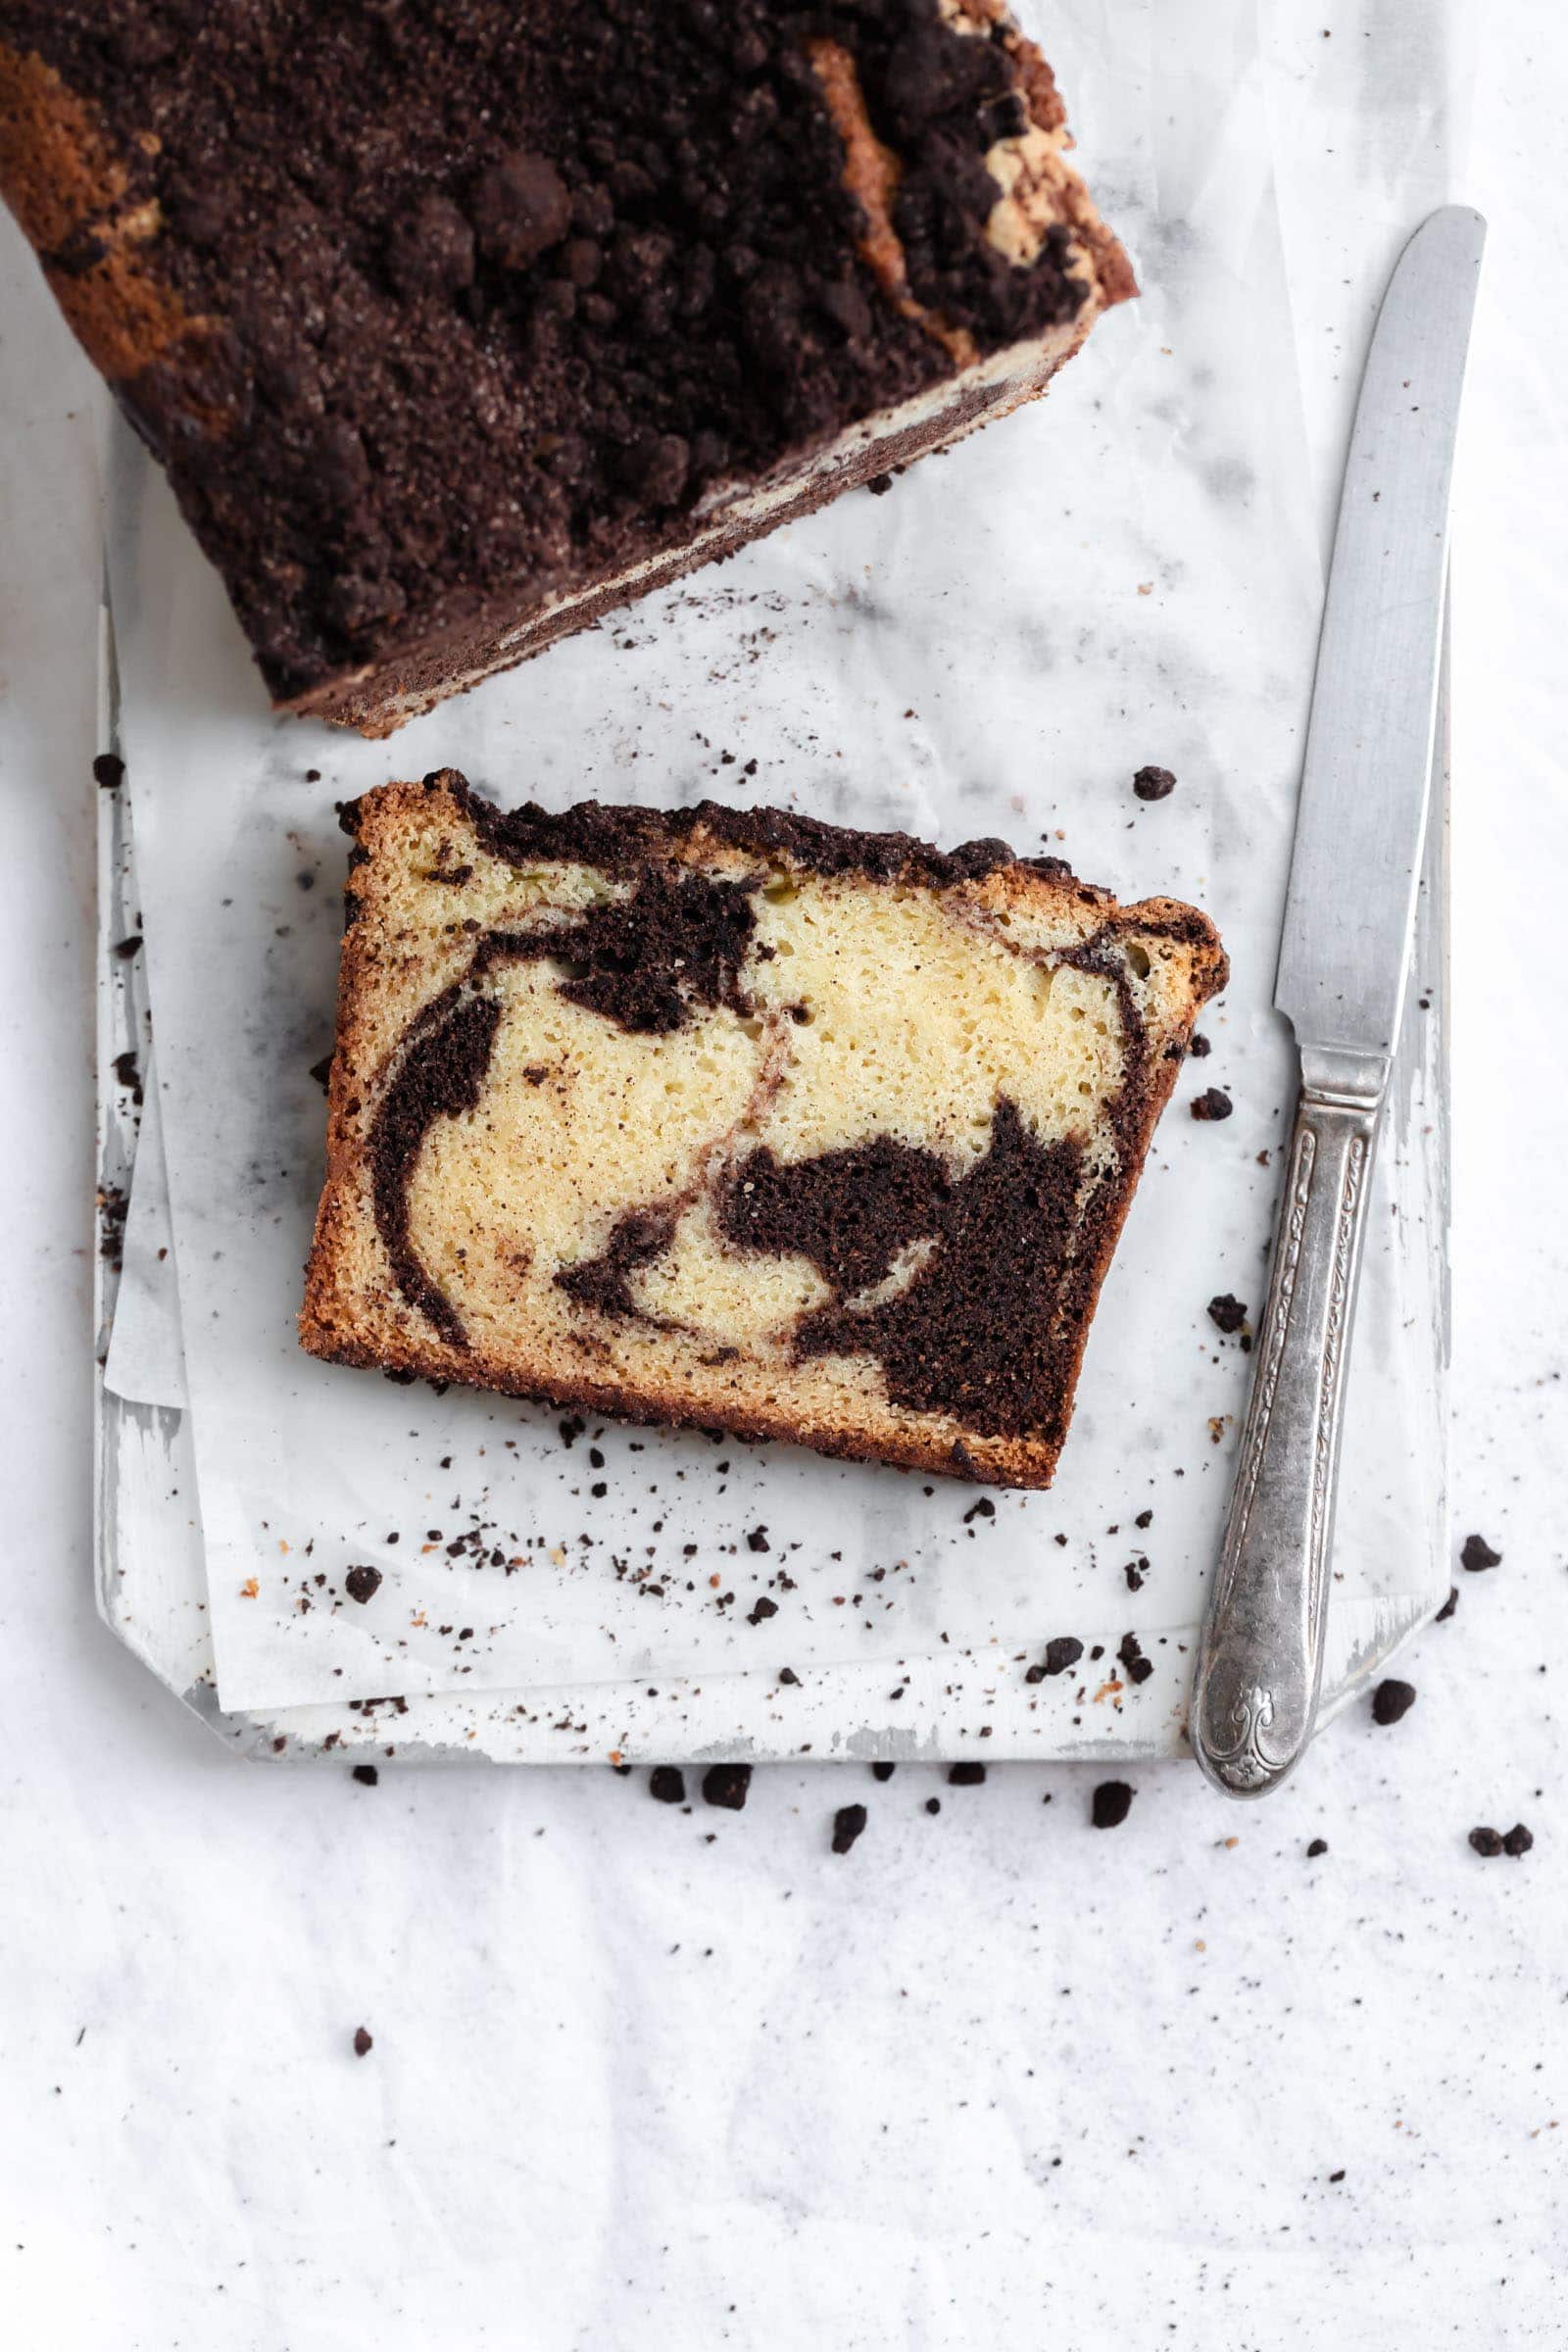 Marble Cake Recipe - Moist, Fluffy, and So Simple to Make